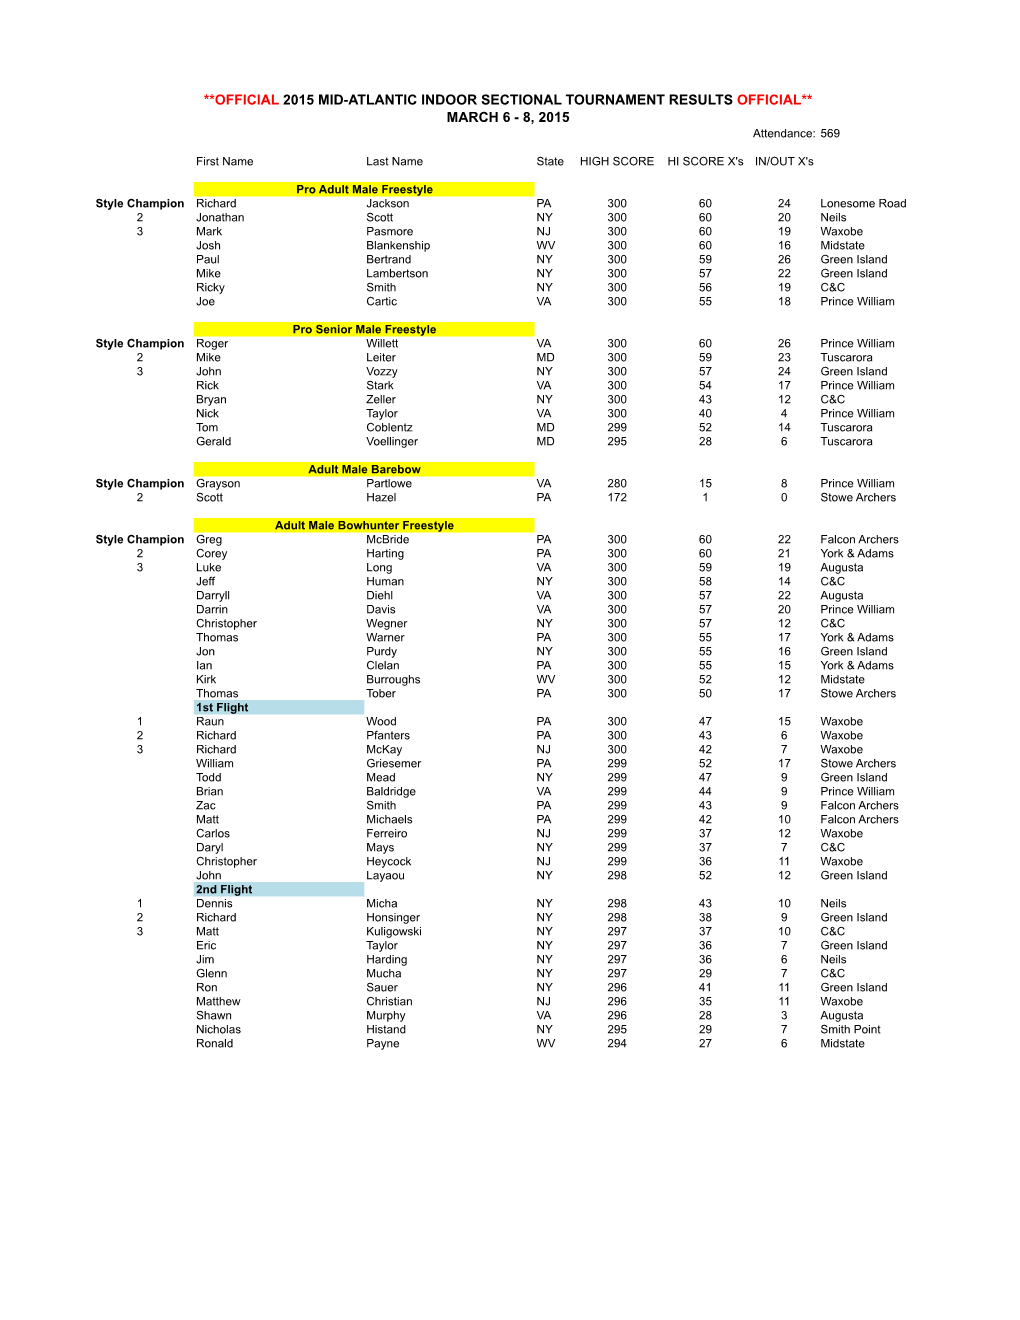 Official 2015 Mid-Atlantic Indoor Section Results.Xlsx